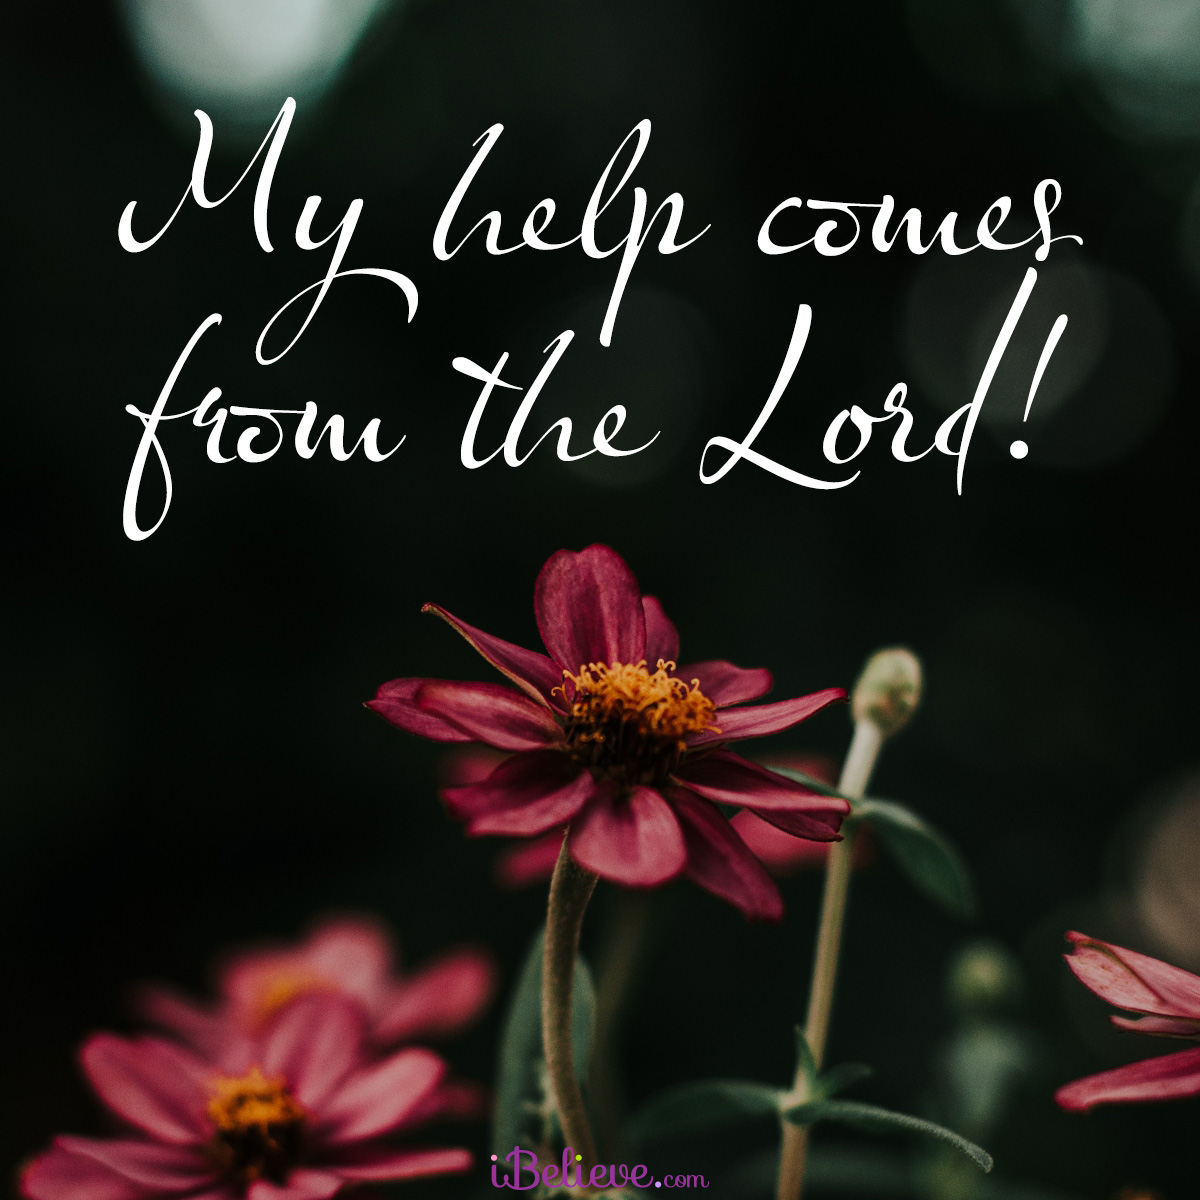 My Help comes from the Lord